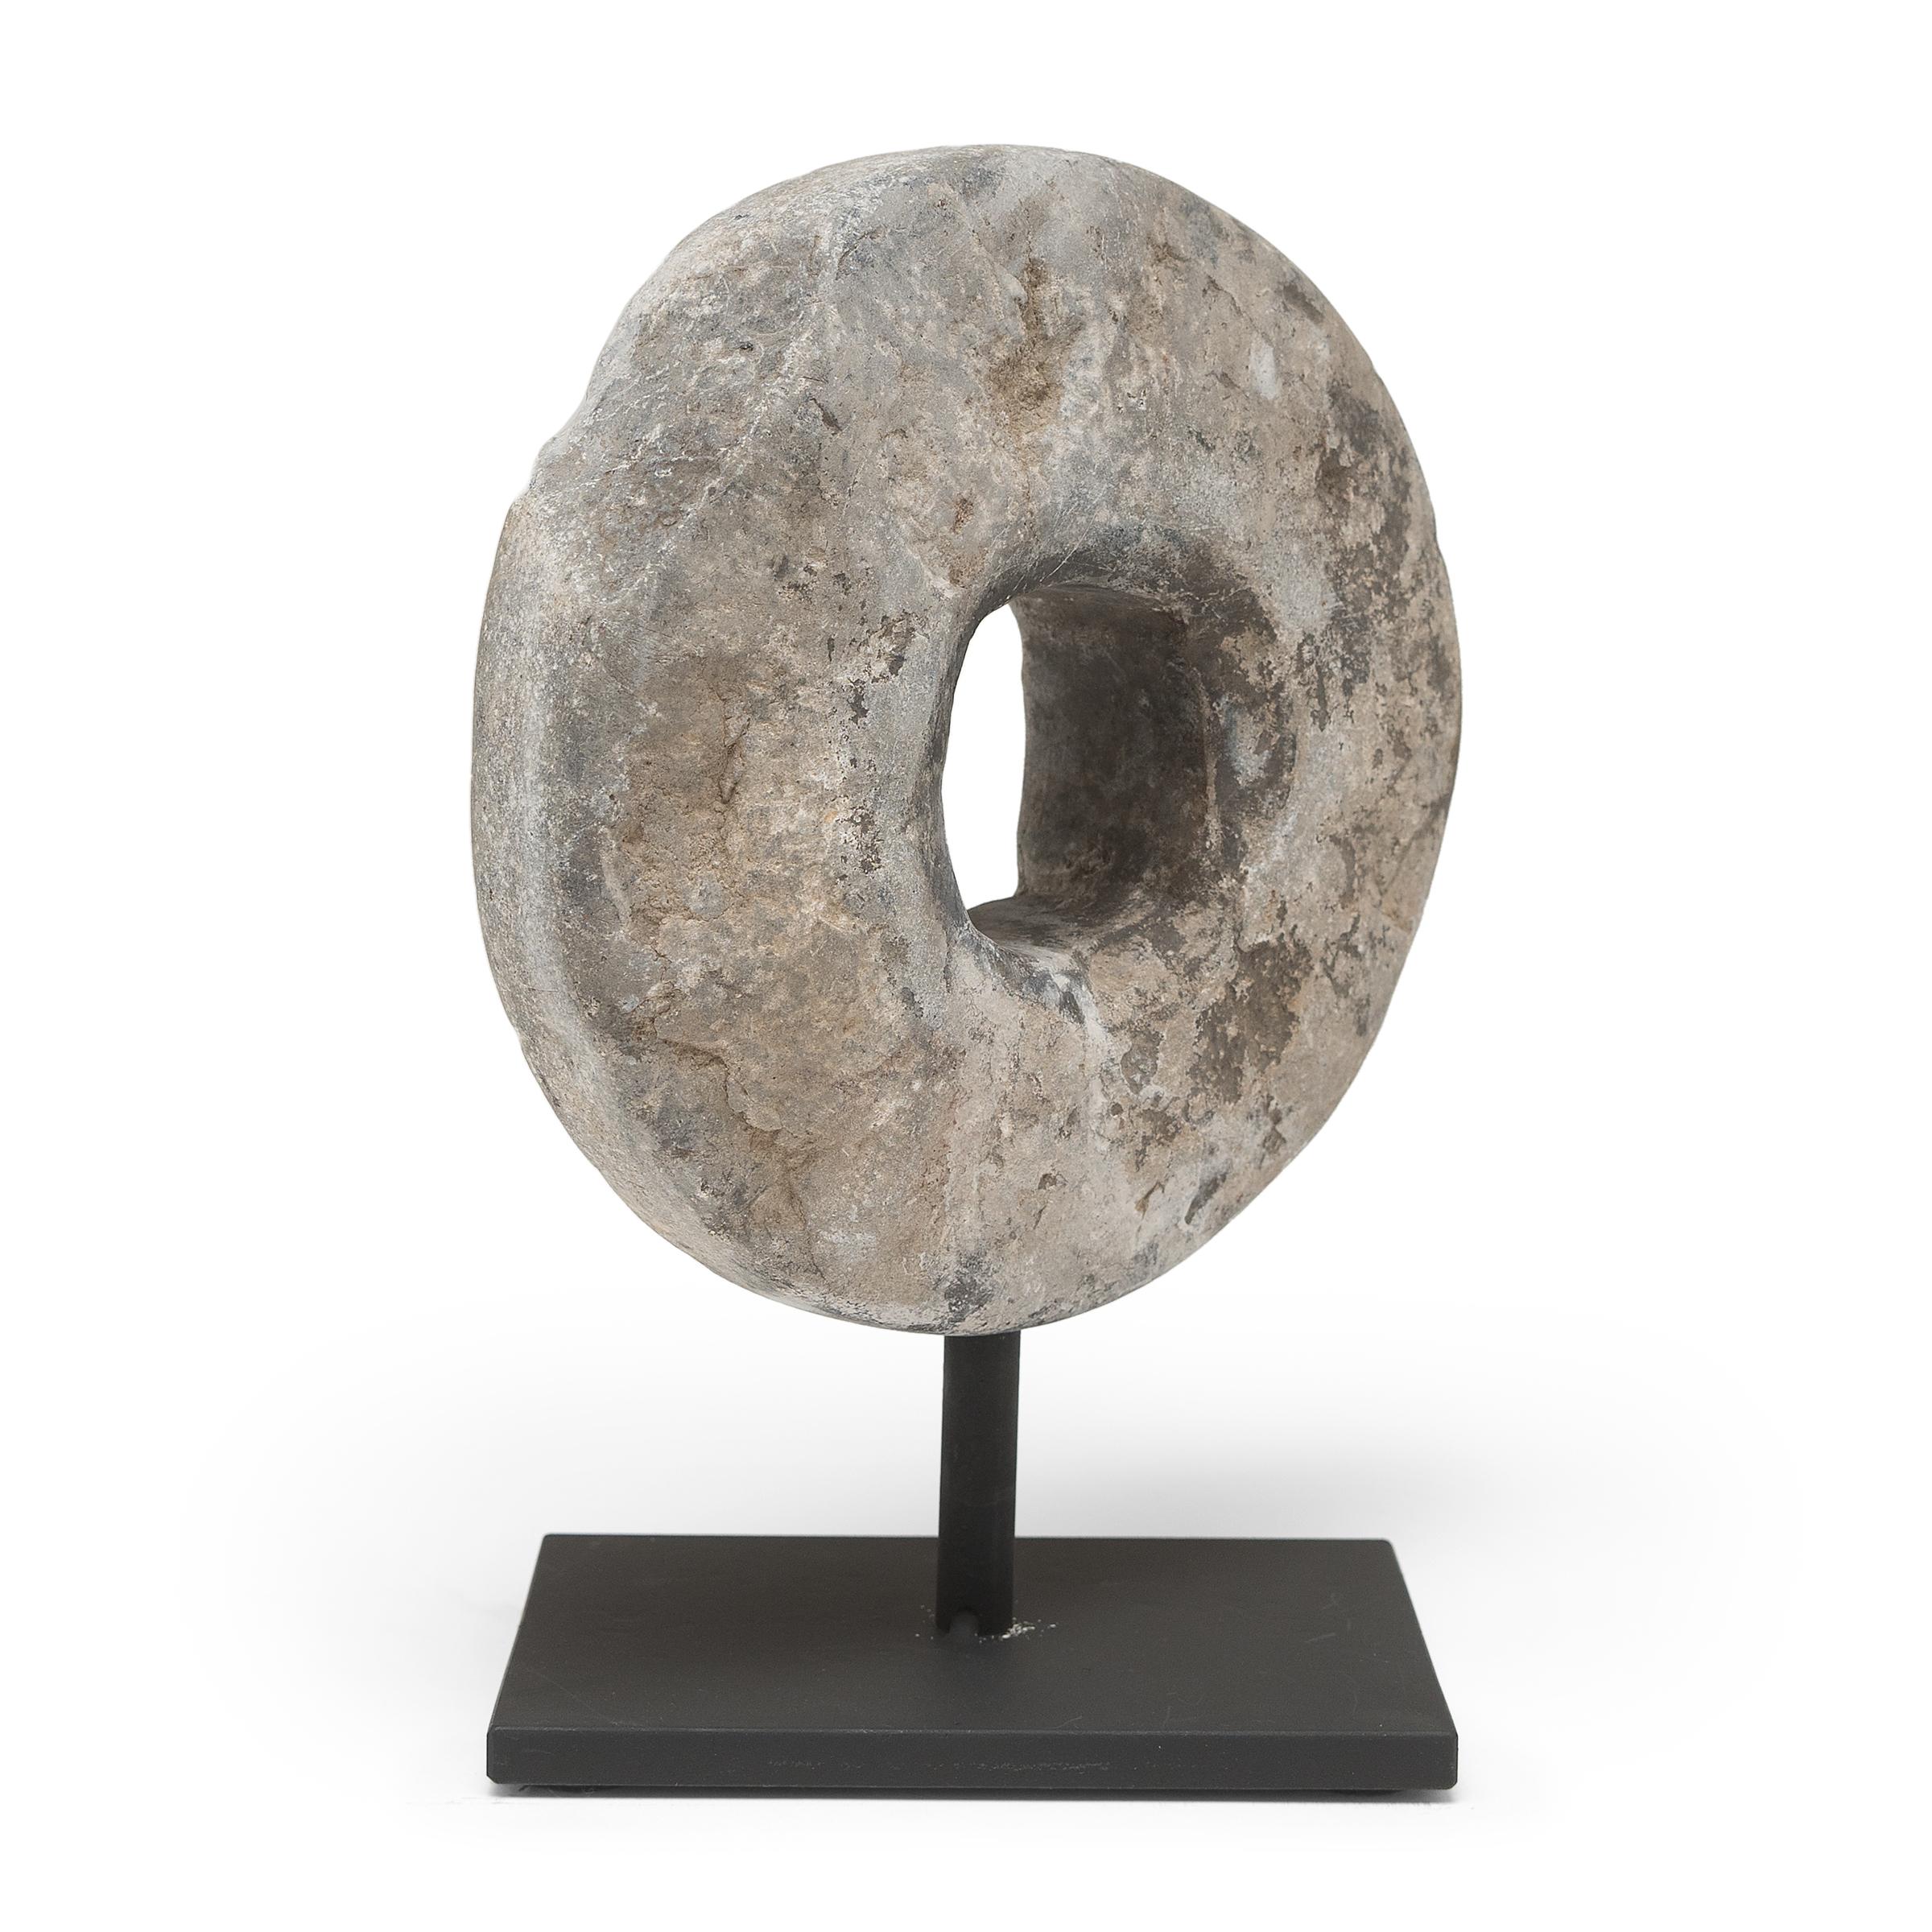 This round stone disc originated as an early 20th-century threshing wheel. Secured to a wooden axel that ran through the center, the stone was rolled across stalks of wheat to separate the grain, pulled either by man or by ox. With simplicity of